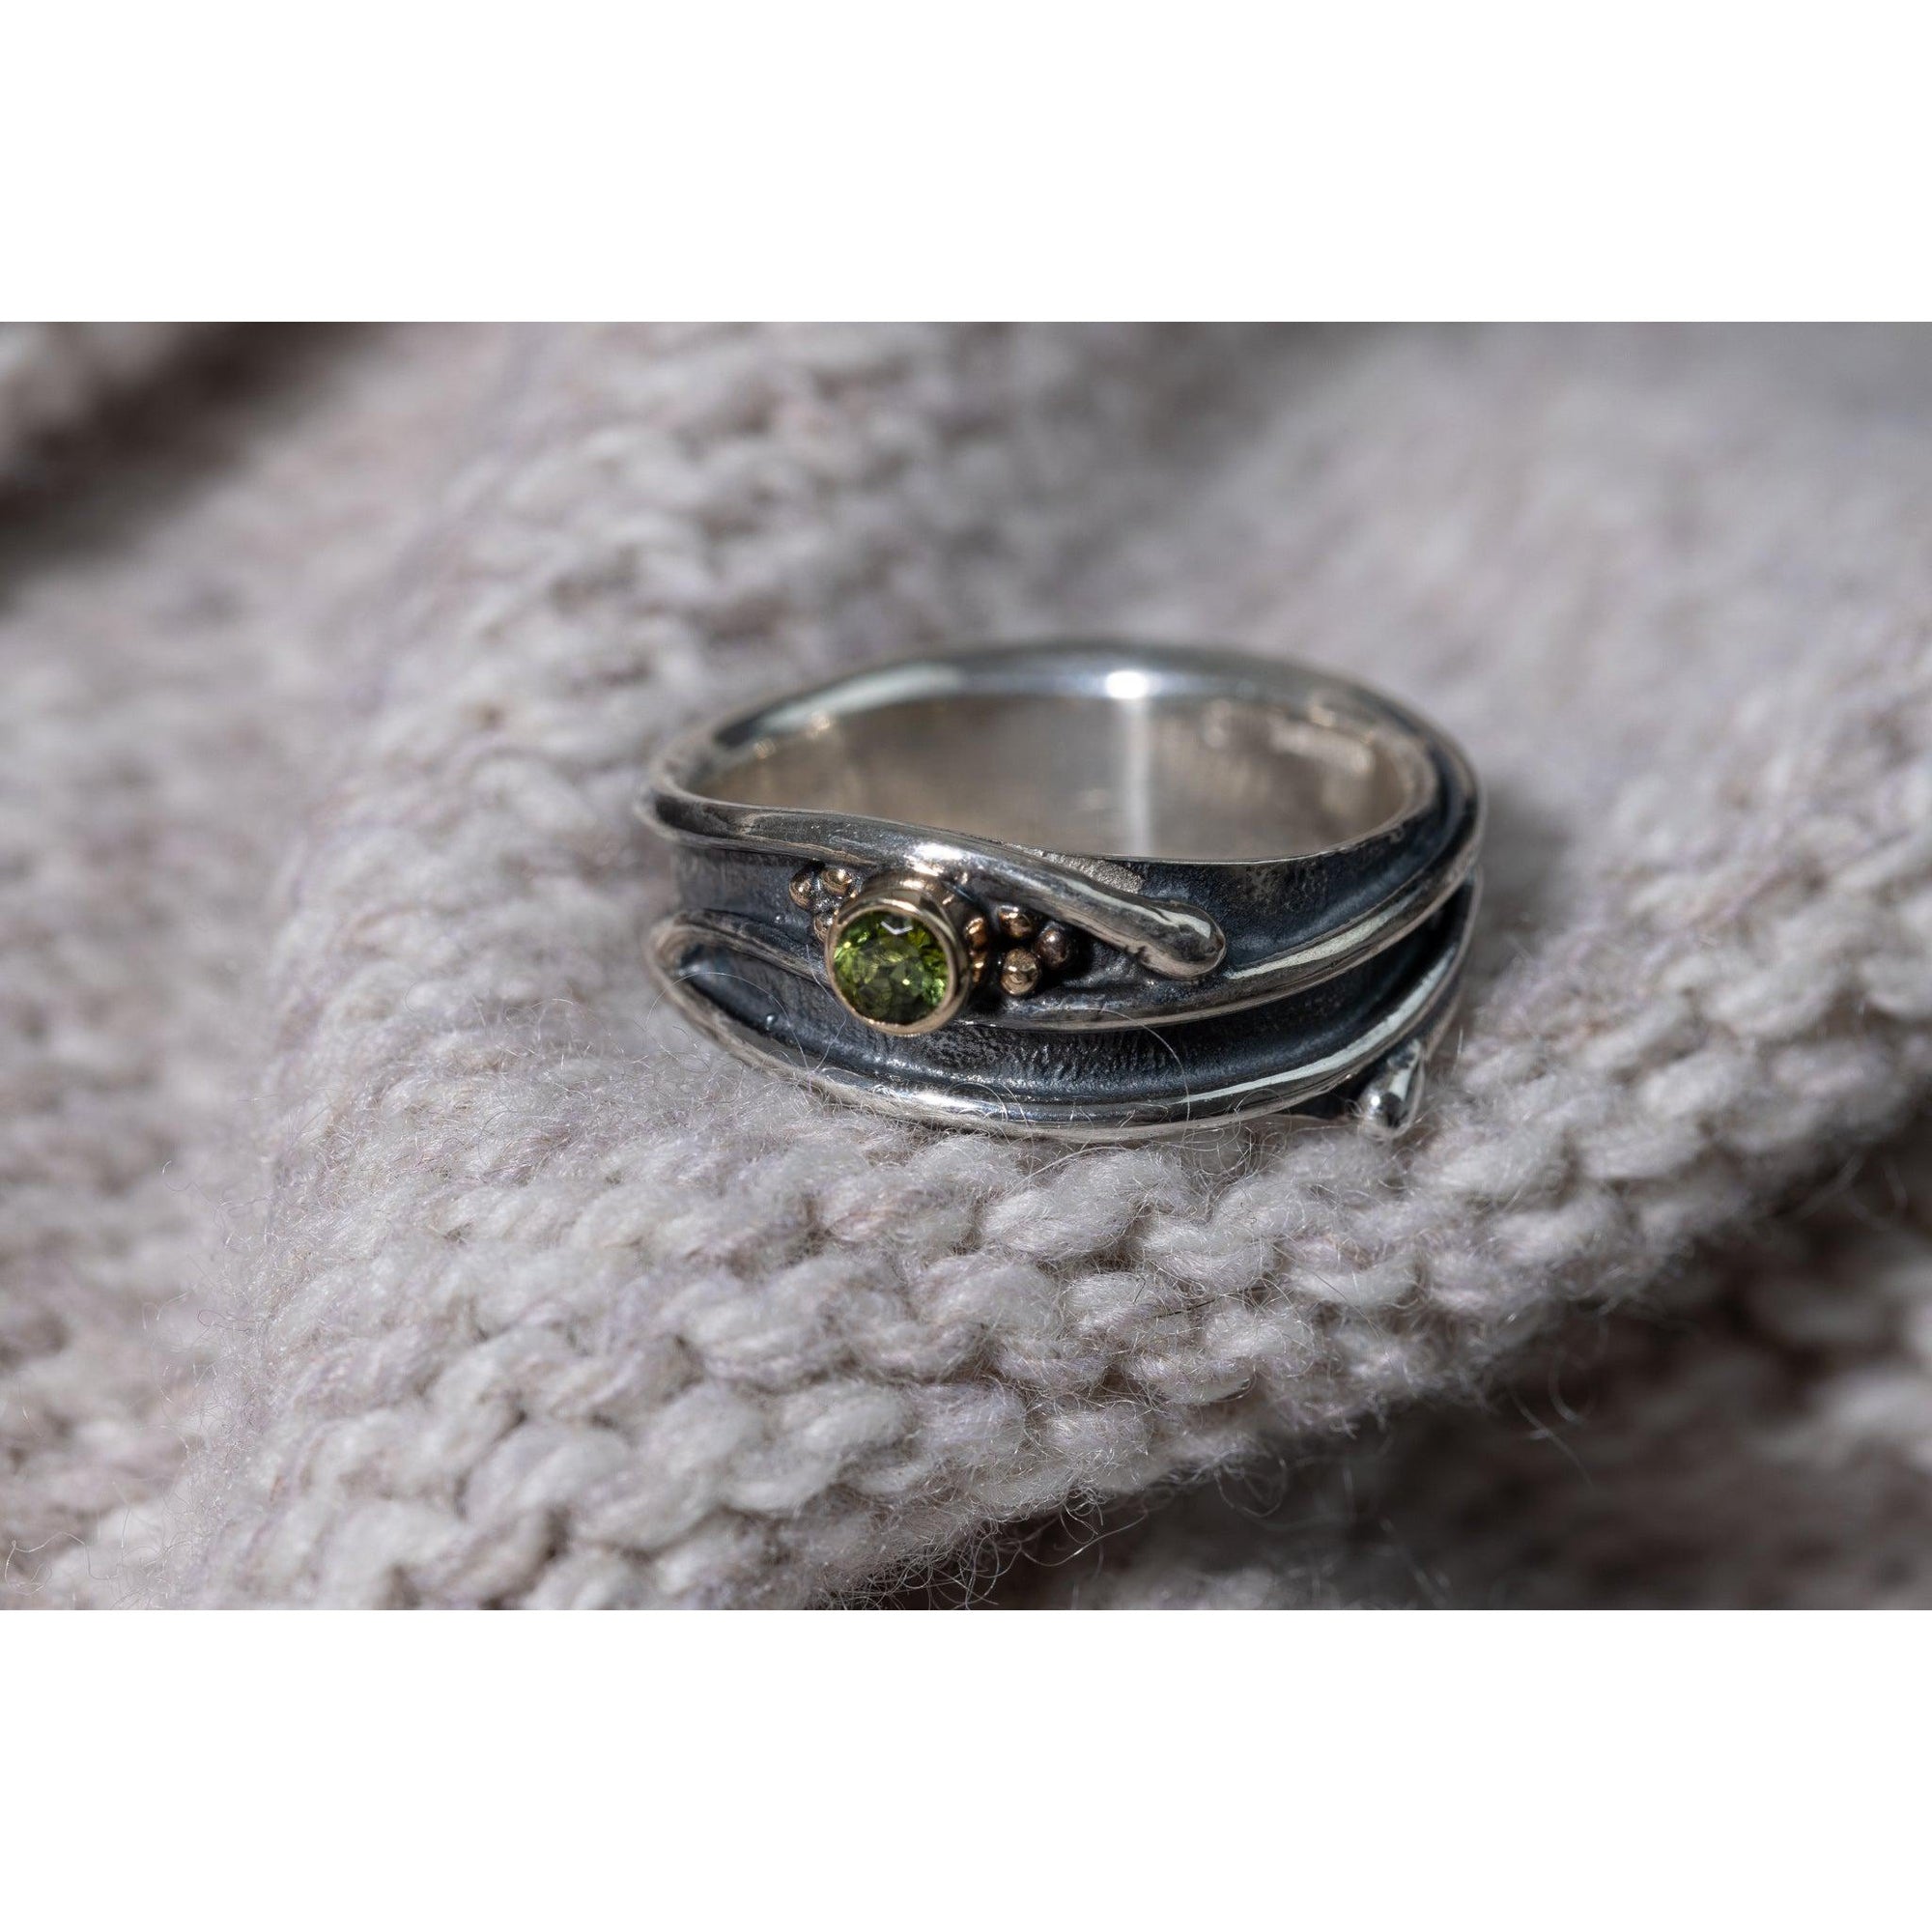 'LG66 - Silver Ring with 9ct Gold 3.5mm Peridot Ring ' by Les Grimshaw, available at Padstow Gallery, Cornwall